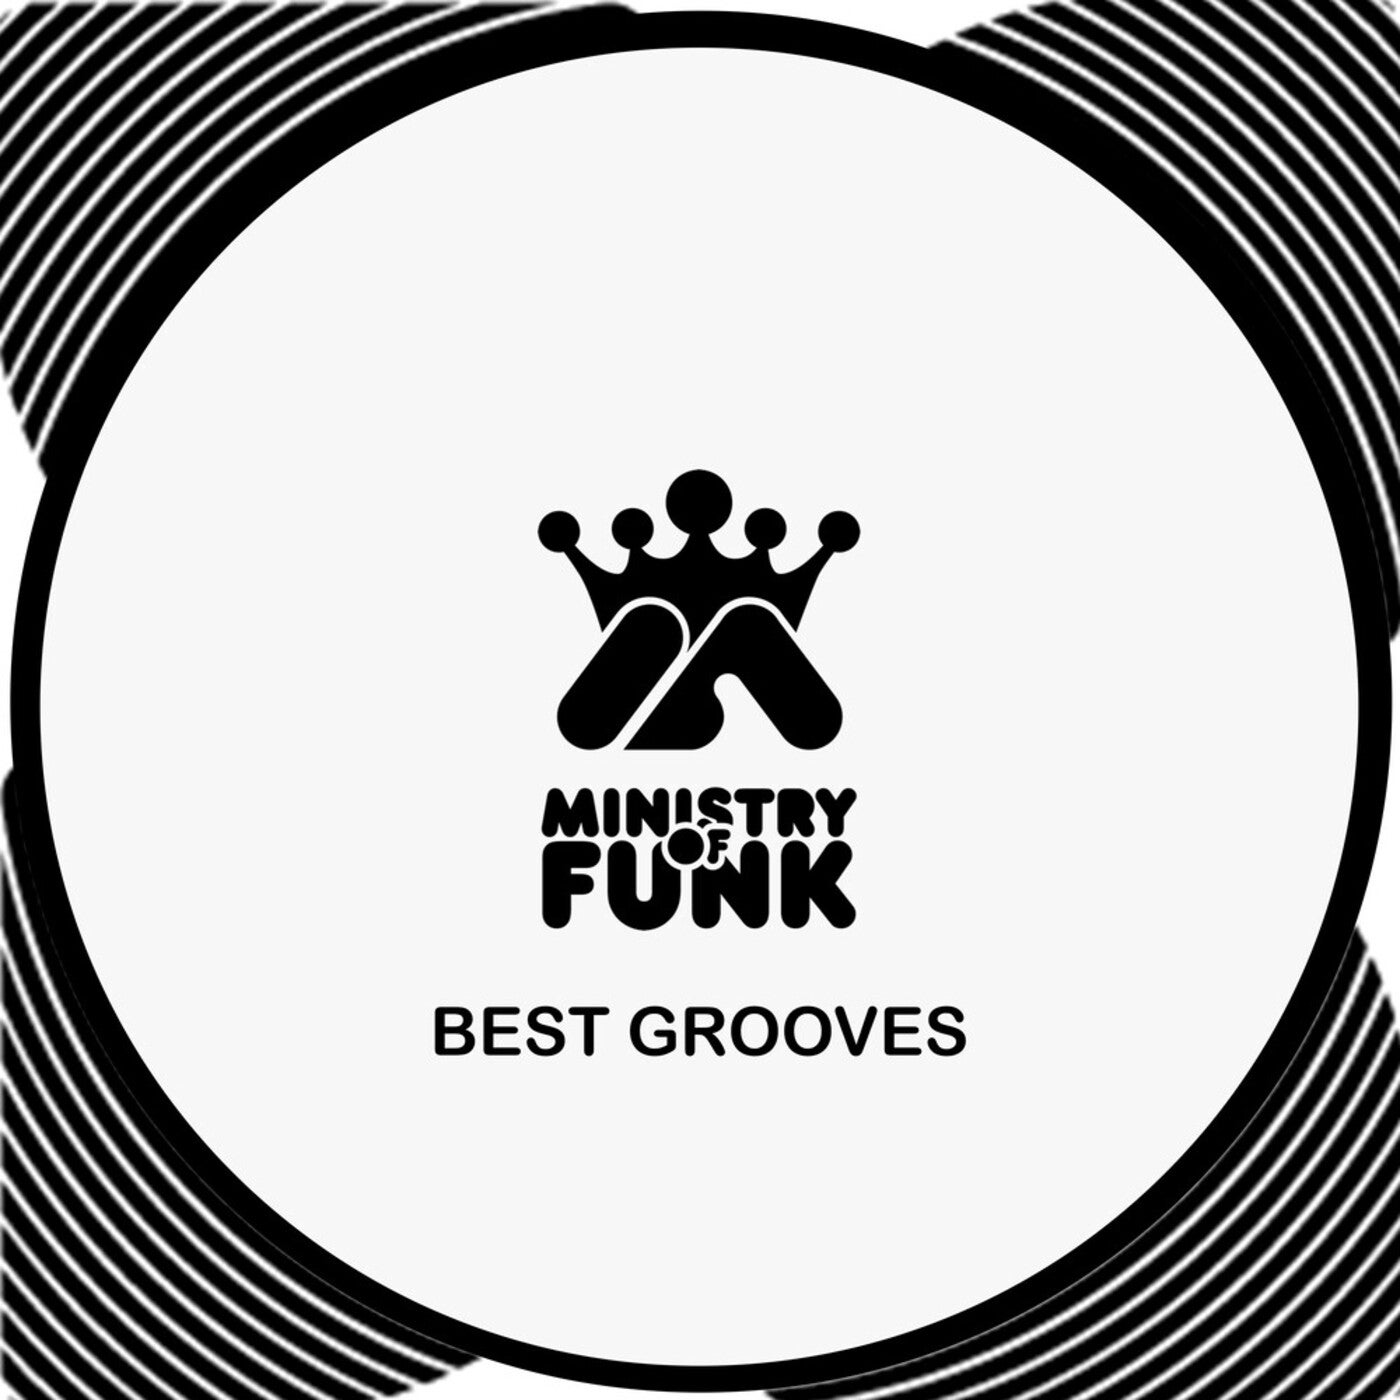 Best Grooves